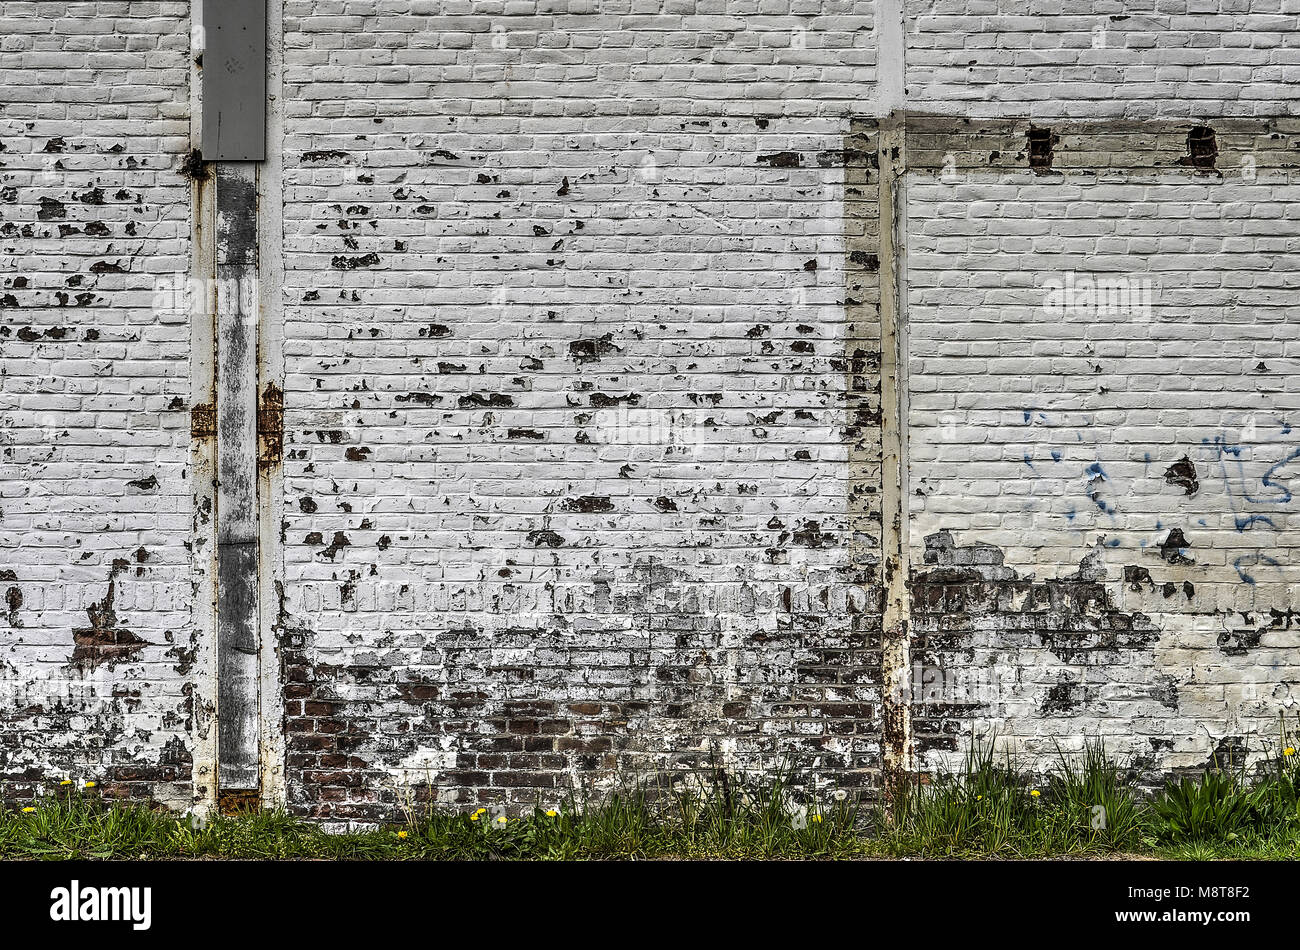 Old brick wall with peeling white paint and remnants of demolished adjacent elements Stock Photo